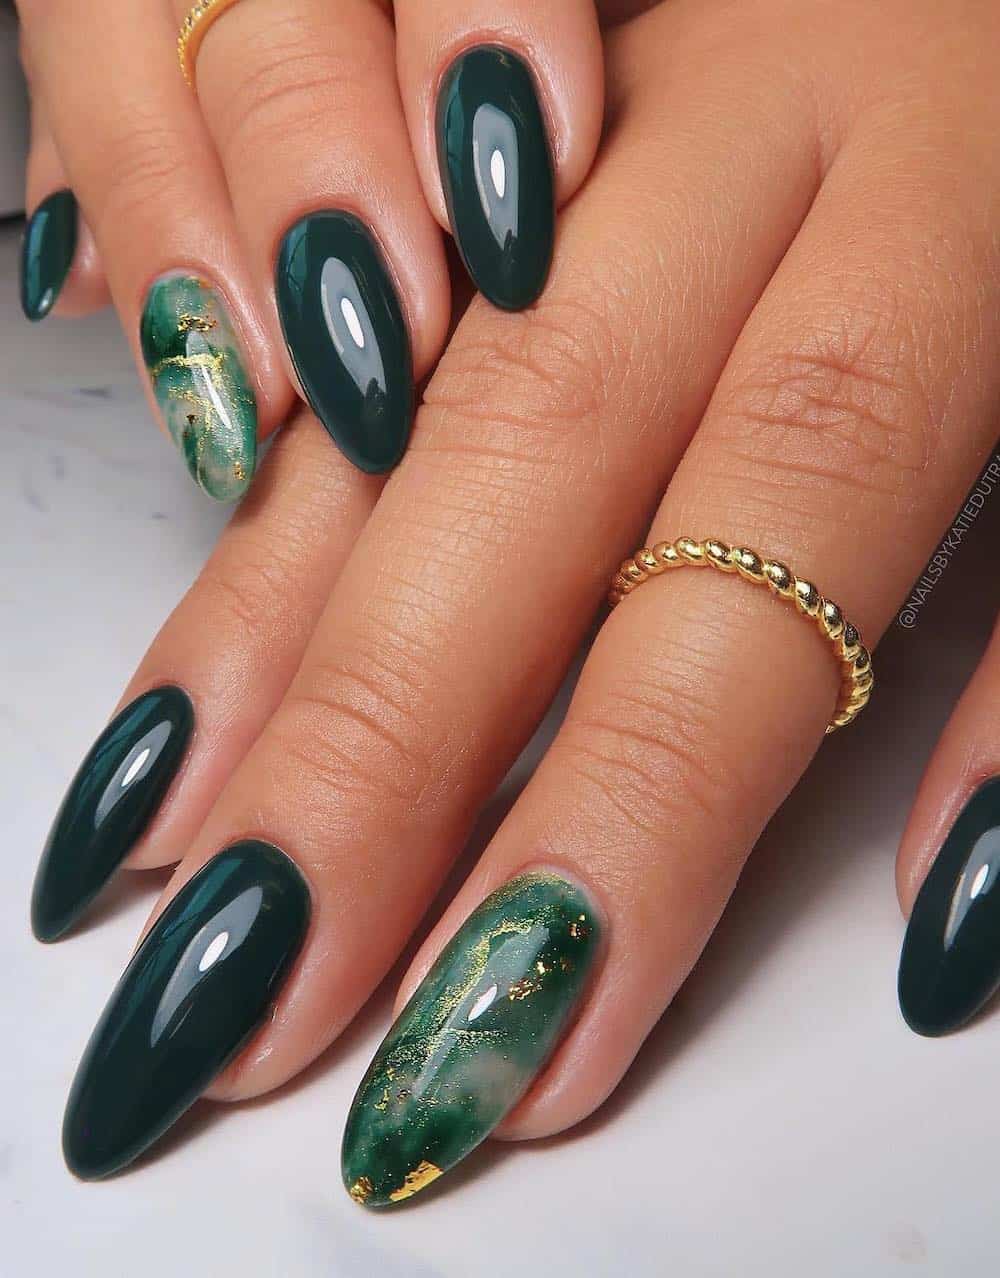 long almond nails with forest green nail polish and marbled accent nails with gold details